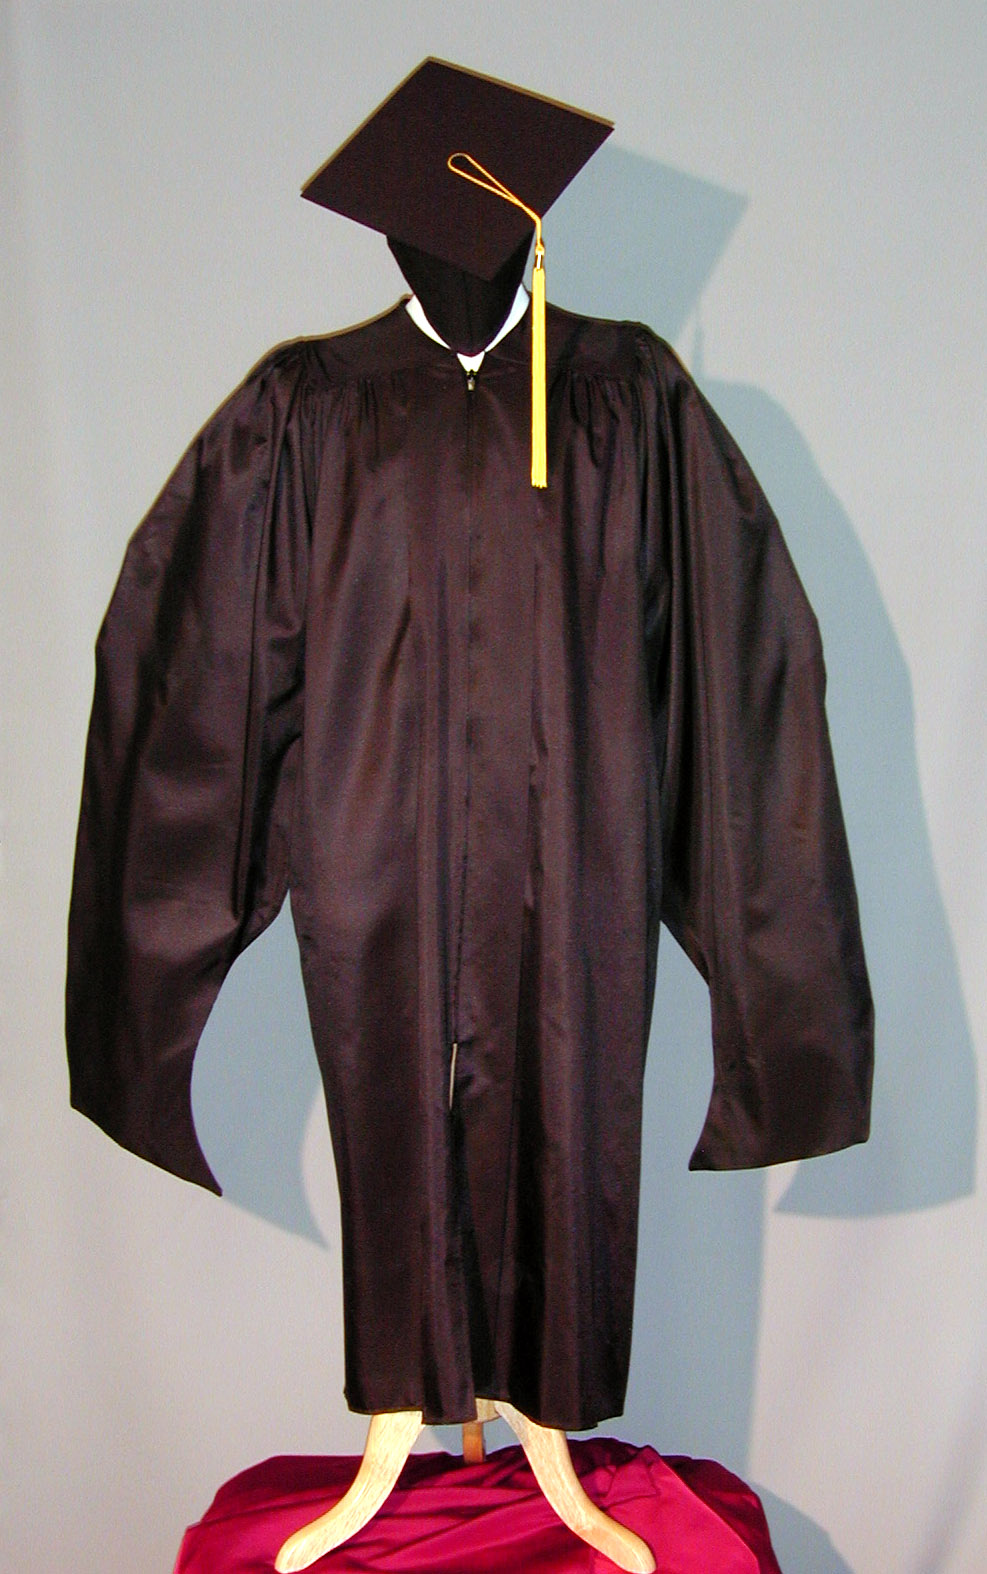 Masters Gown, Robe, Graduate, Faculty, Professional, Verona, Student